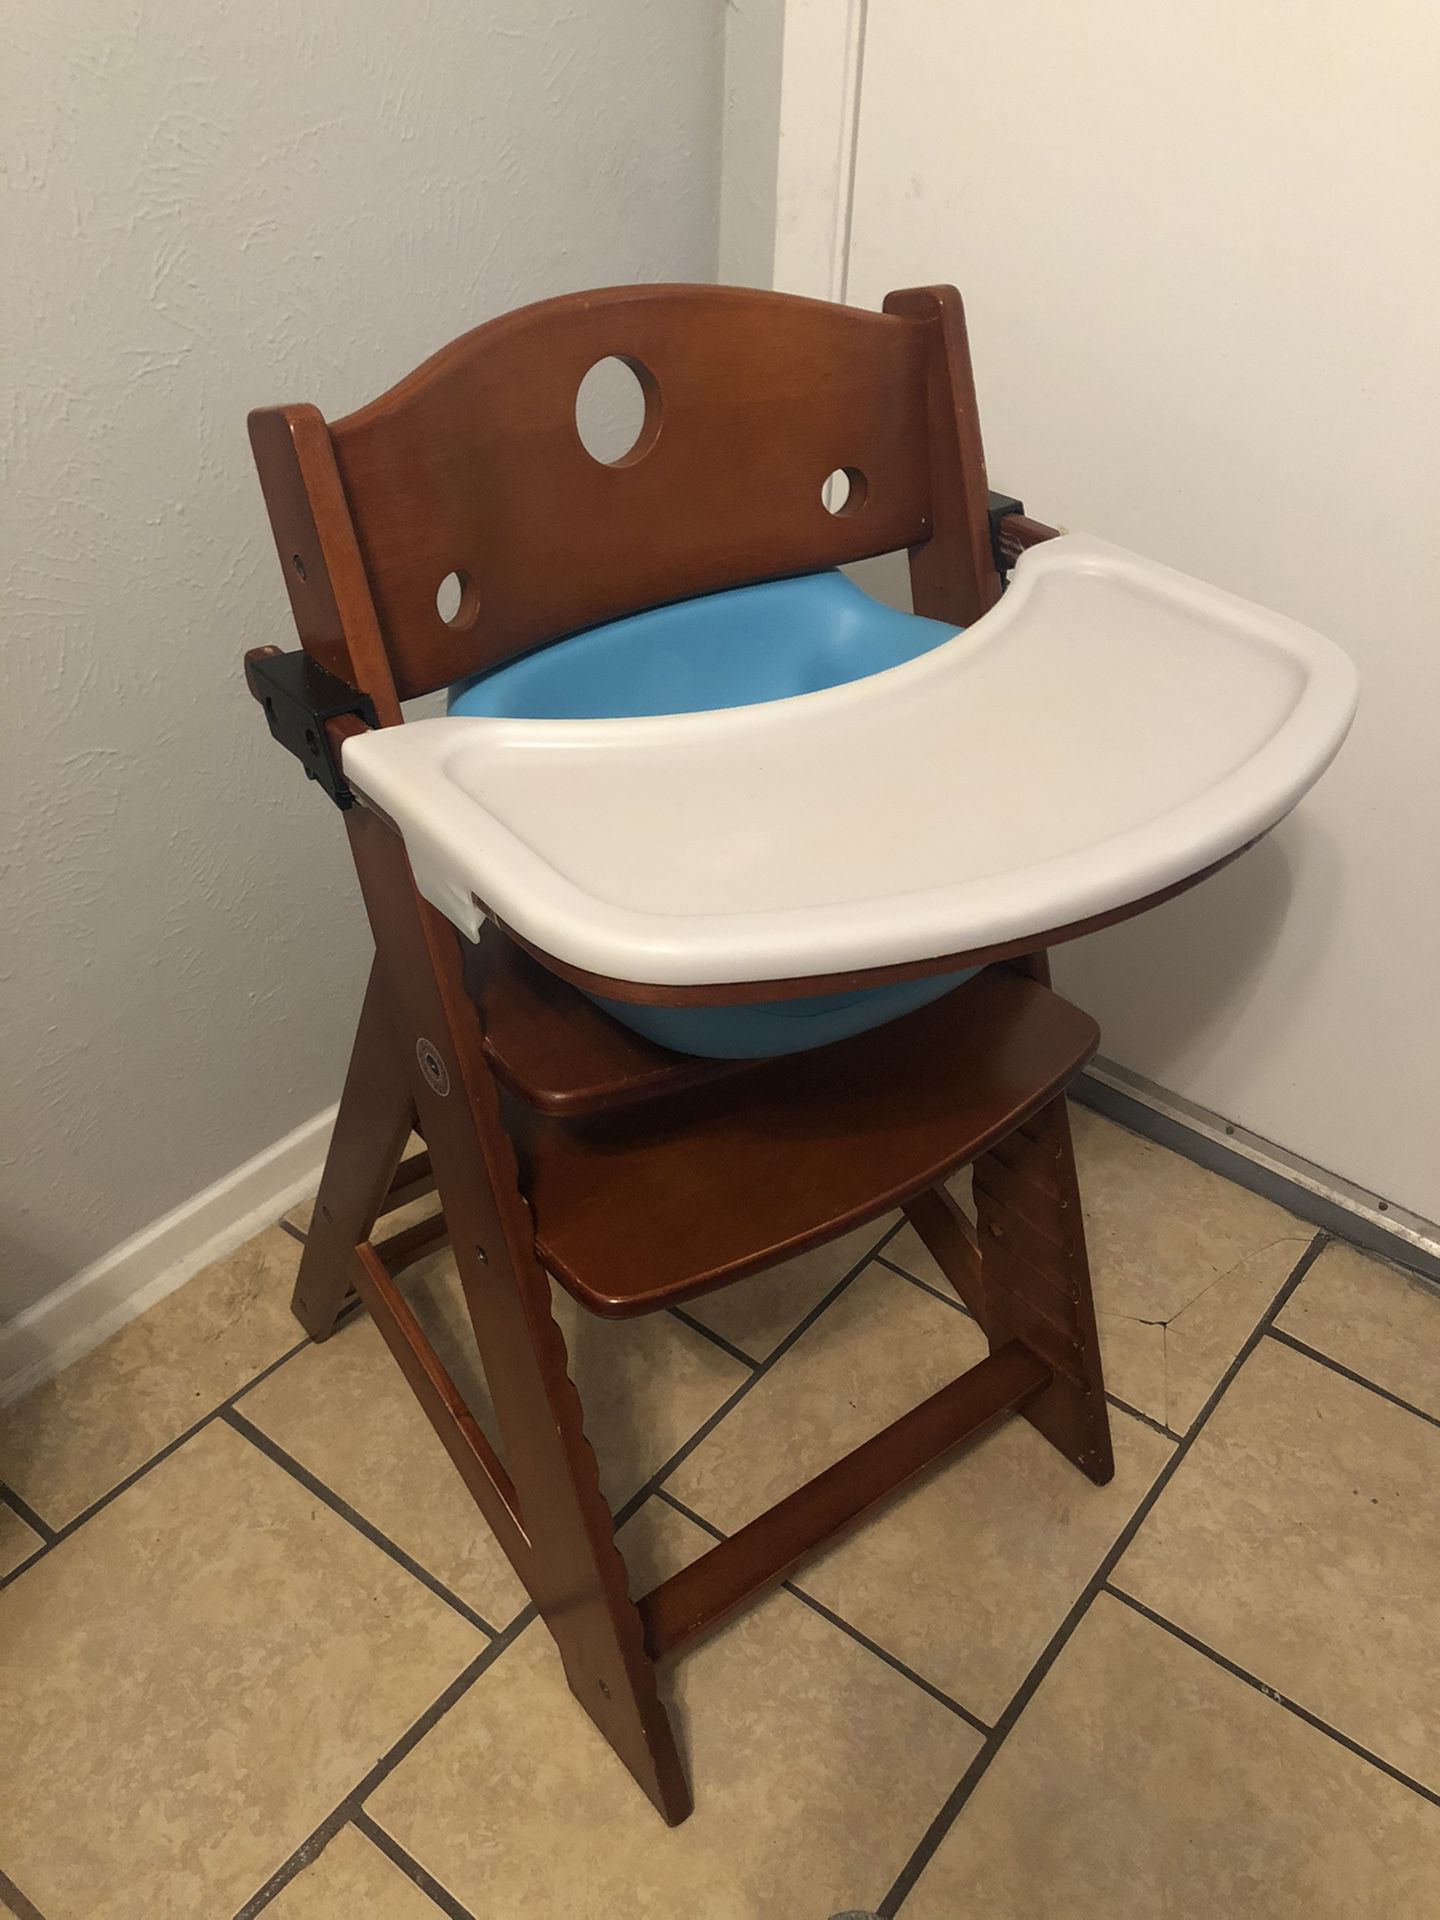 Keekaroo wooden feeding high chair baby kids booster seat adjustable height footrest tray & new straps